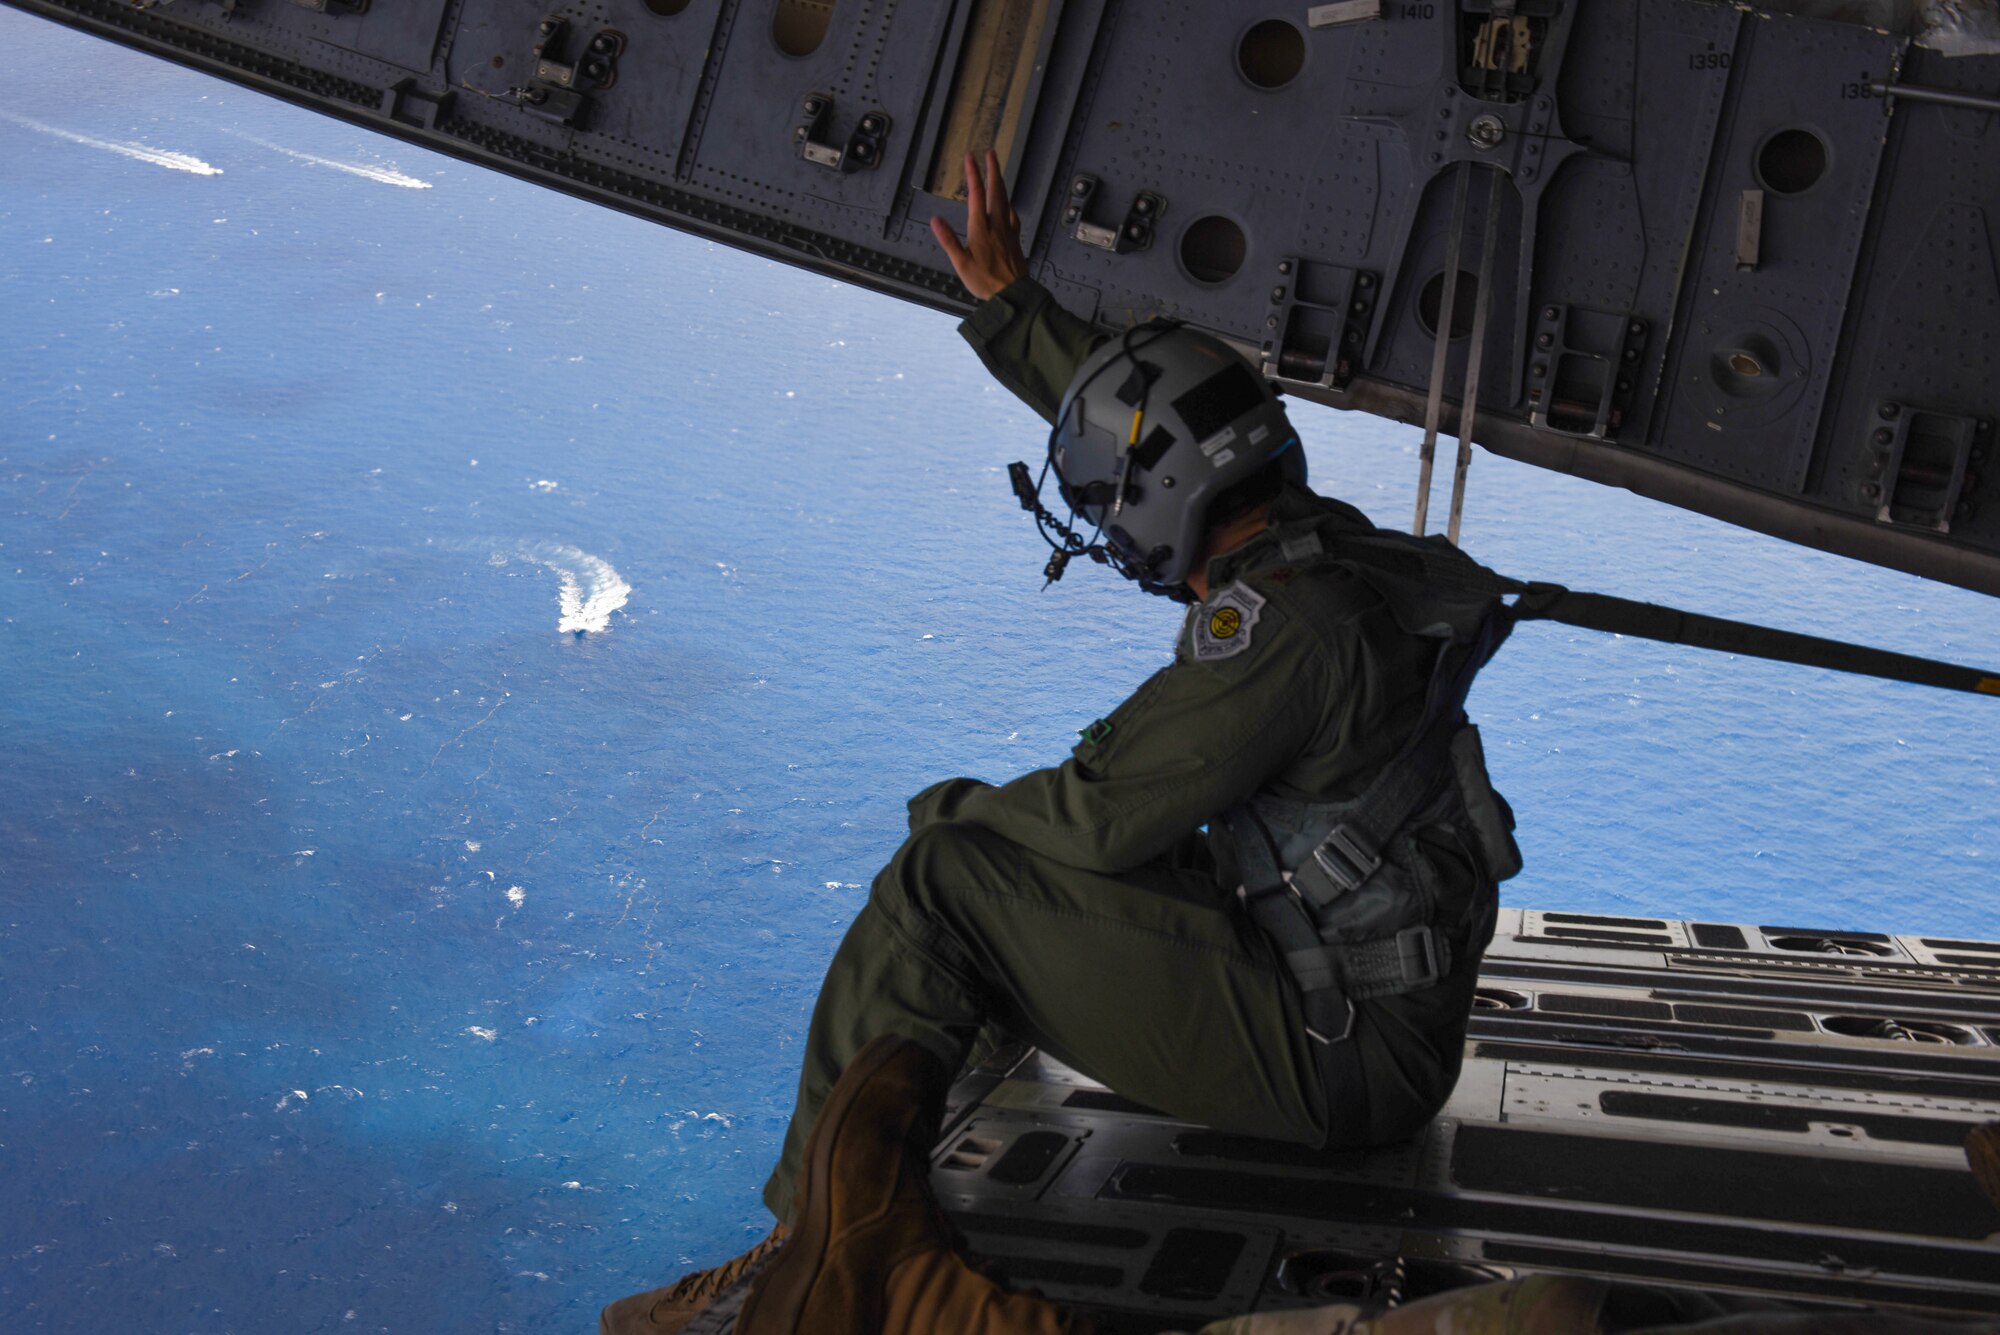 U.S. Air Force Maj. Mack Delgado, C-17 West Coast Demo Team pilot, waves to boats off the coast of Miami Beach, Florida, from the cargo ramp of a C-17 Globemaster III, May 31, 2021. The C-17 was headed back to Joint Base Lewis-McChord, Washington, after completing their demonstrations in the National Salute to Our Heroes Hyundai Air and Sea Show. (U.S. Air Force photo by Senior Airman Mikayla Heineck)